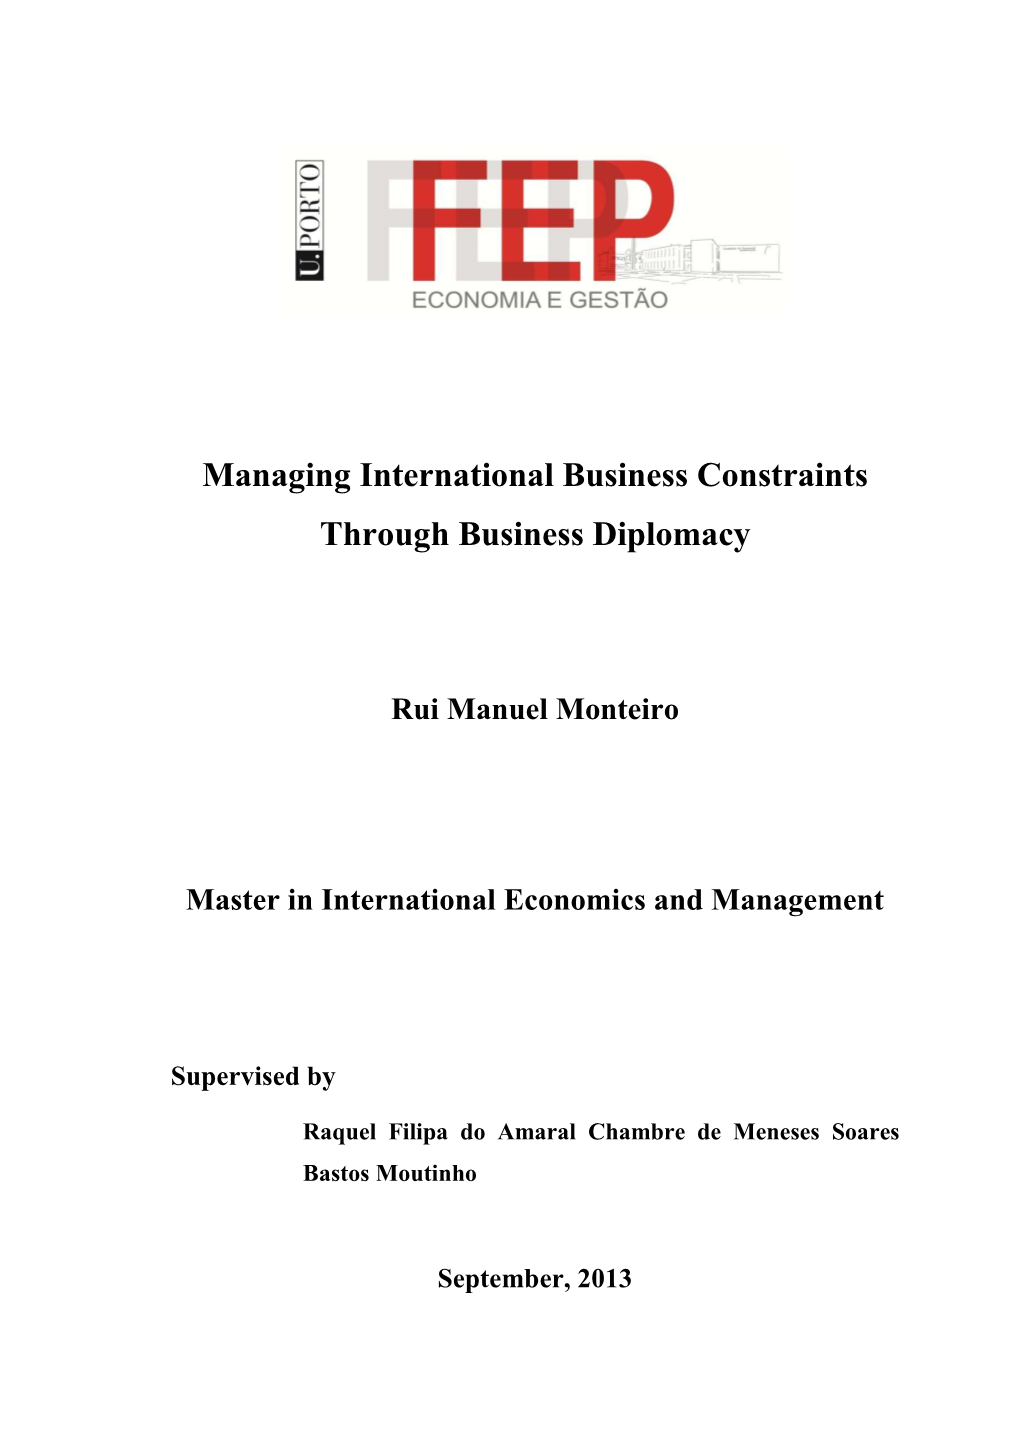 Managing International Business Constraints Through Business Diplomacy